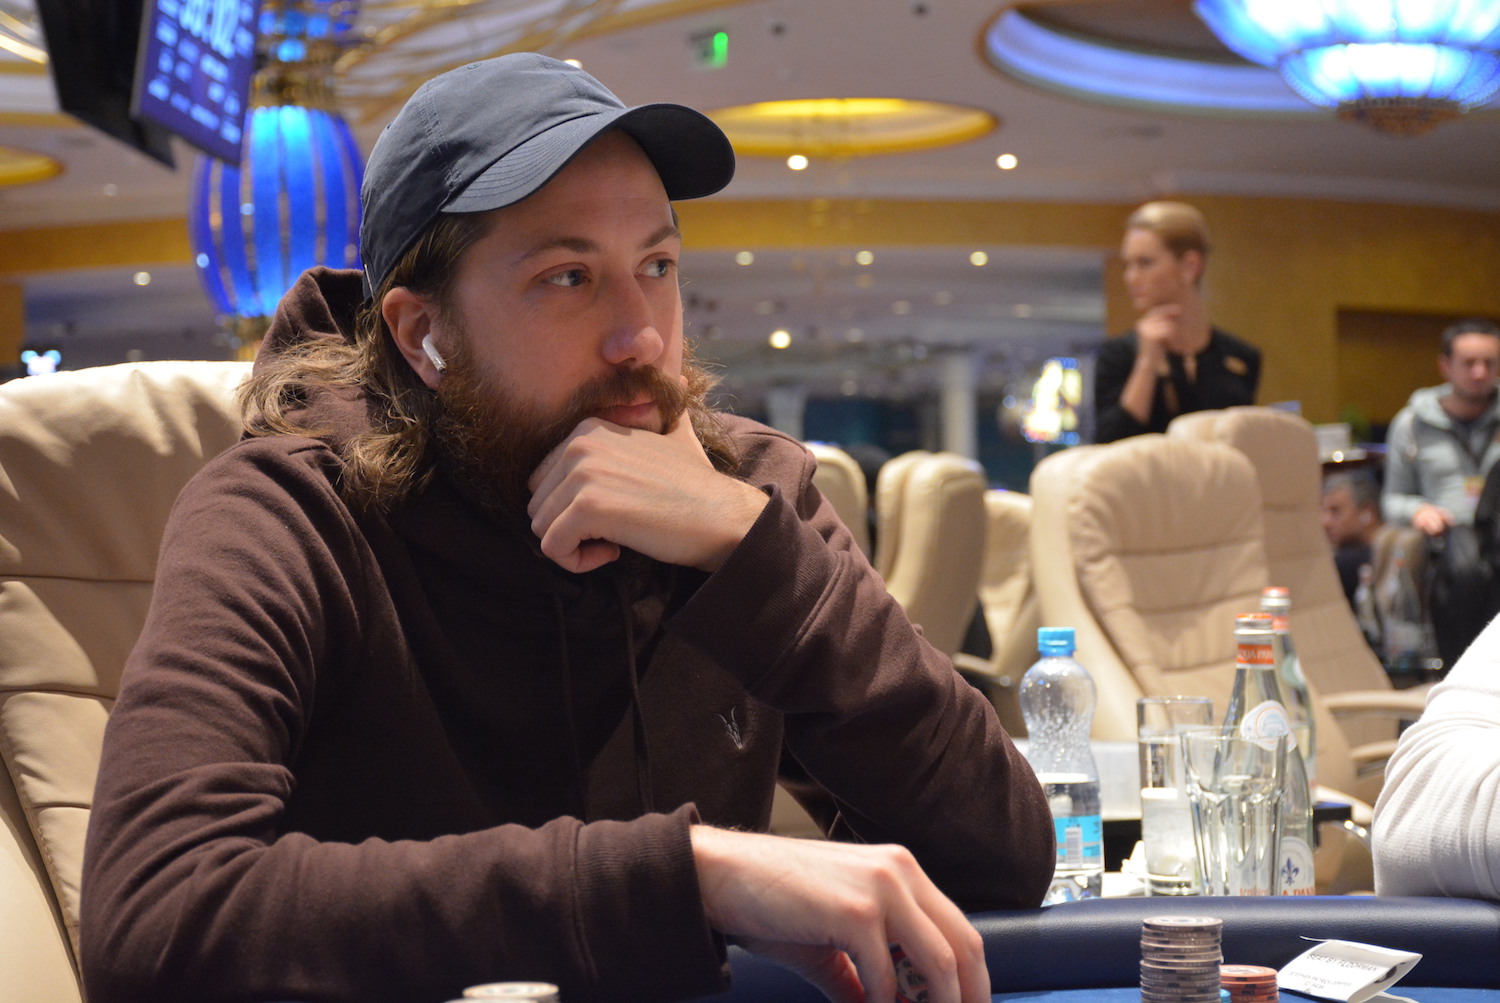 Steve O’Dwyer Wins Three-Player €25,500 High Roller at Master Classics of Poker in Amsterdam